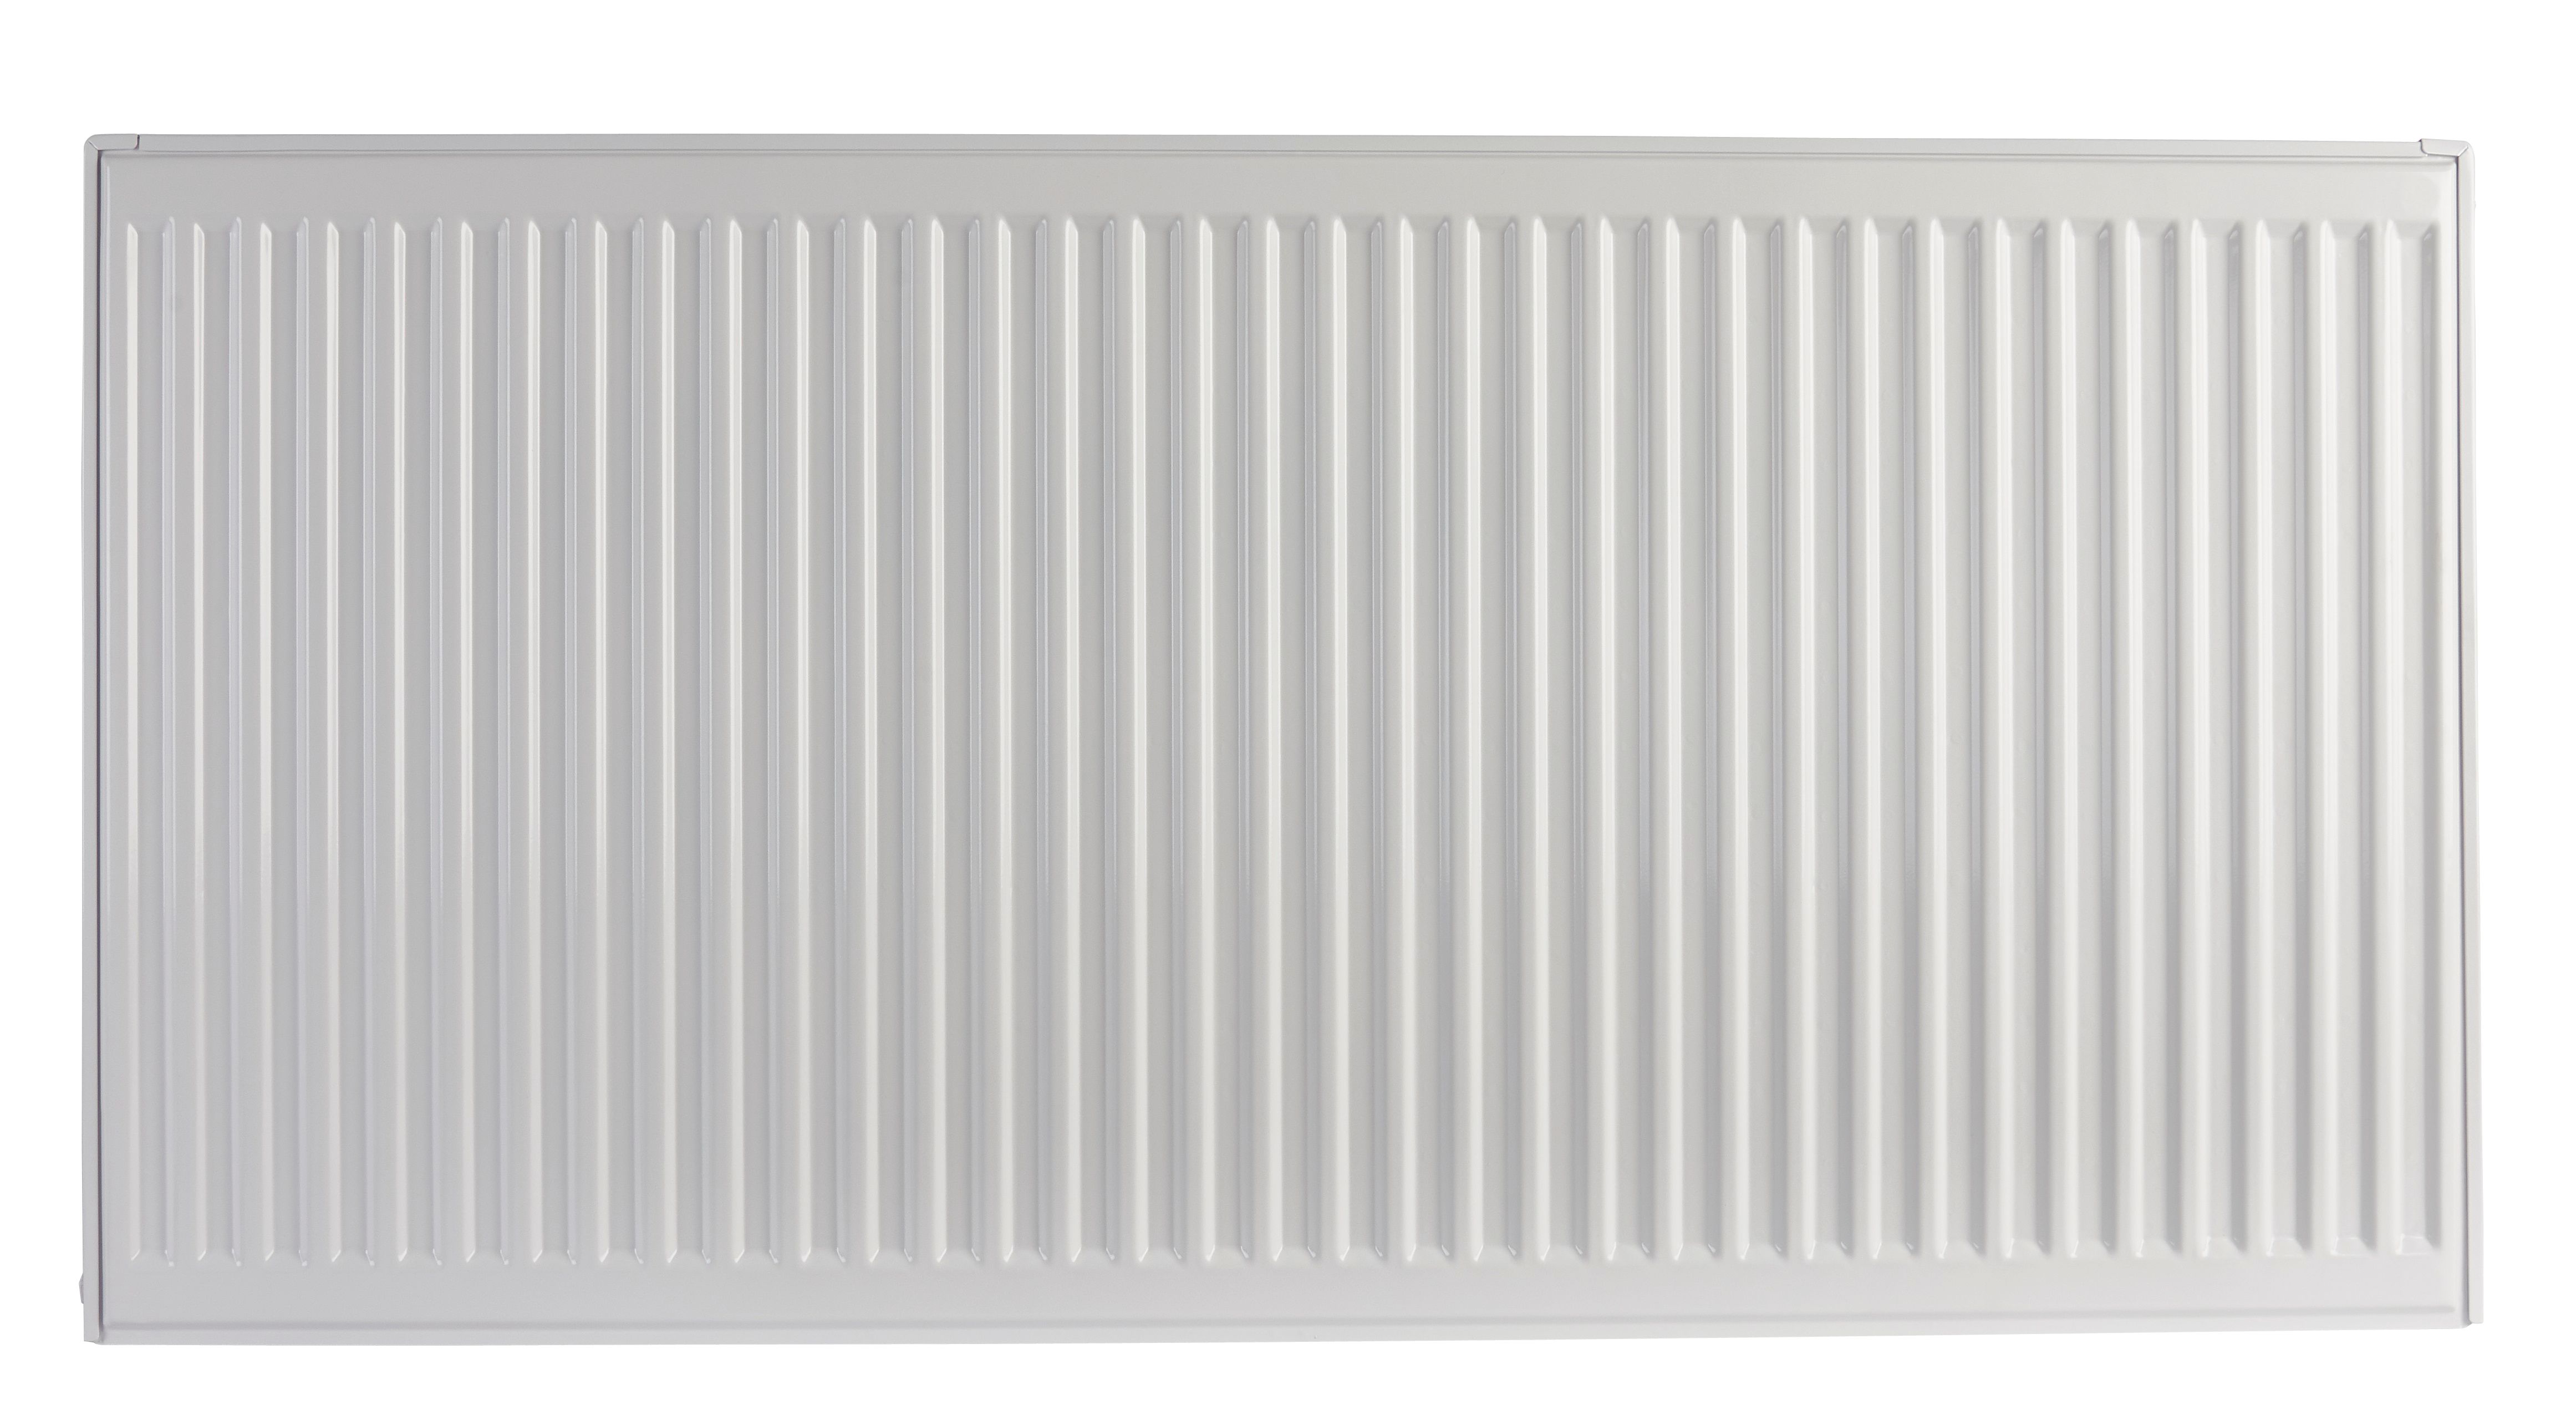 Homeline by Stelrad 500 x 1000mm Type 21 Double Panel Plus Single Convector Radiator